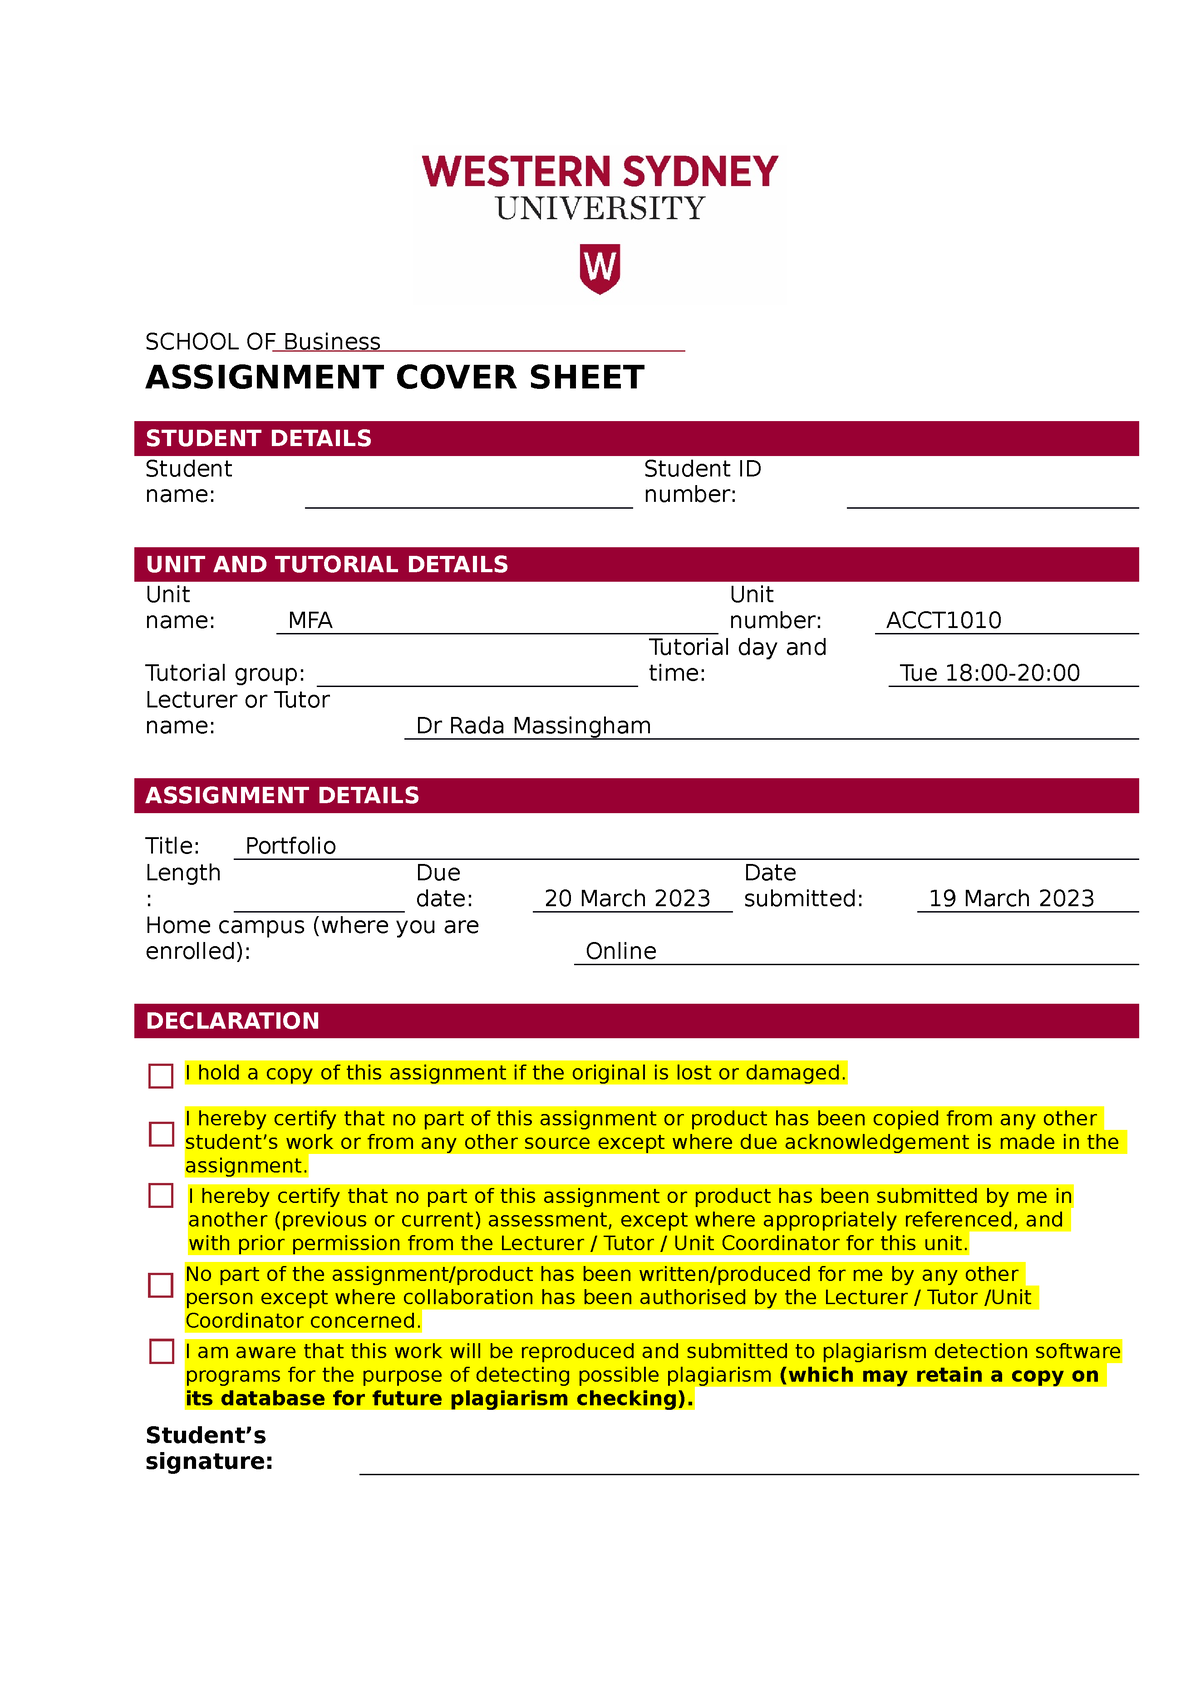 usyd business assignment cover sheet